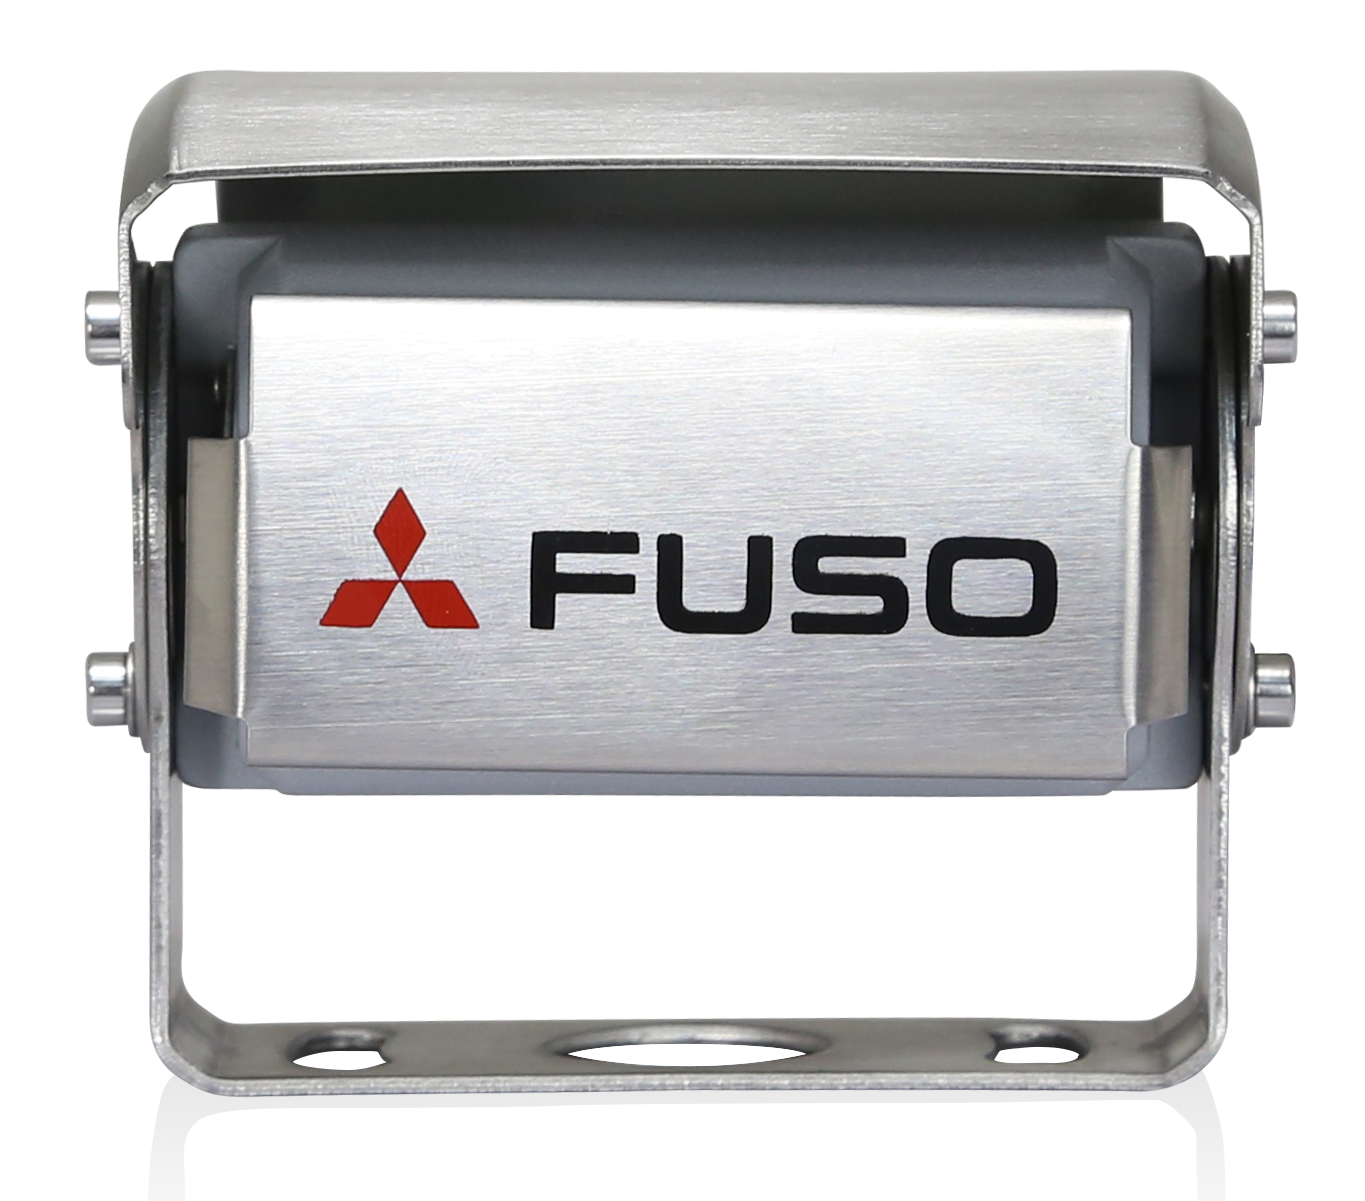 The FUSO Rear View Camera is a high performance product that combines the advantages of high safety and clear vision. A microphone that is equipped with the camera is increasing the awareness behind the vehicle. The monitor screen  changes its color automatically at night for enhanced vision. The system is 12V and 24V compatible and fulfills strict HQ specification and testing requirements. The camera is waterproof to IP69K. The monitors’ resolution is 800x480x3 (RGB).